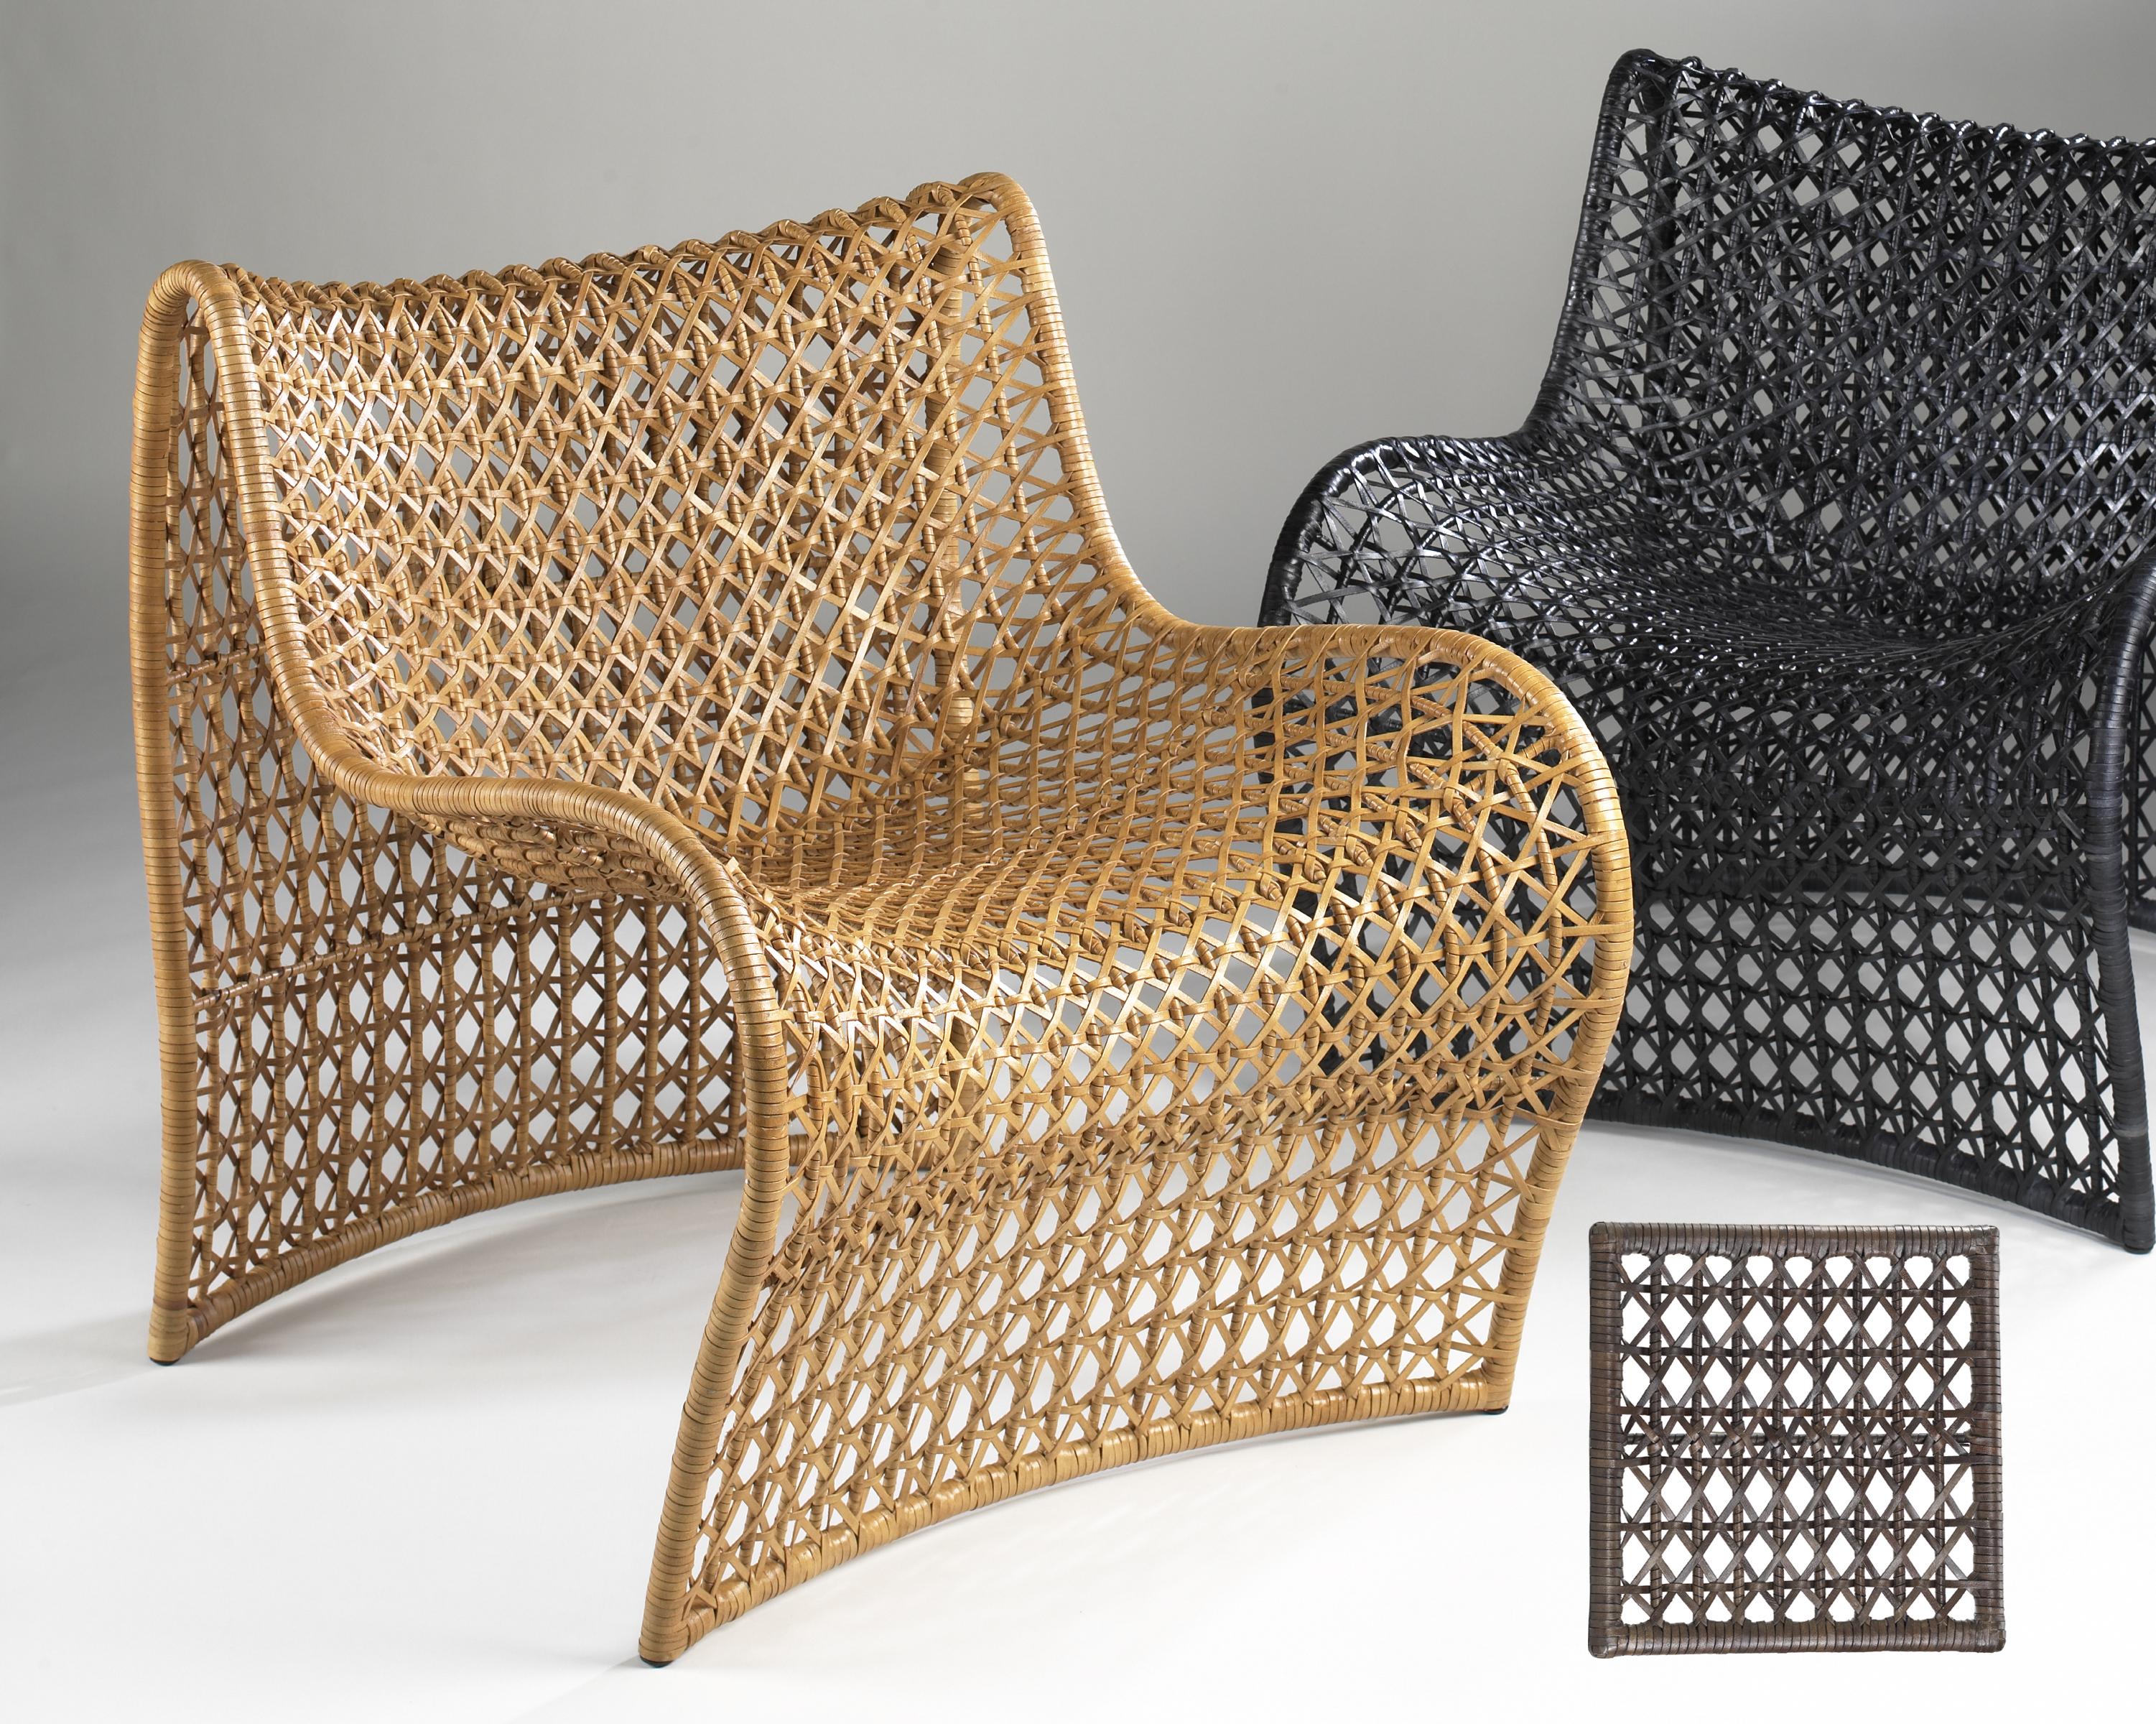 The Lola chair is a true testament to the beauty of design and comfort. The chair features an open weave of leather that covers a sensually shaped frame, creating a striking and eye-catching appearance. This exquisite combination of materials and